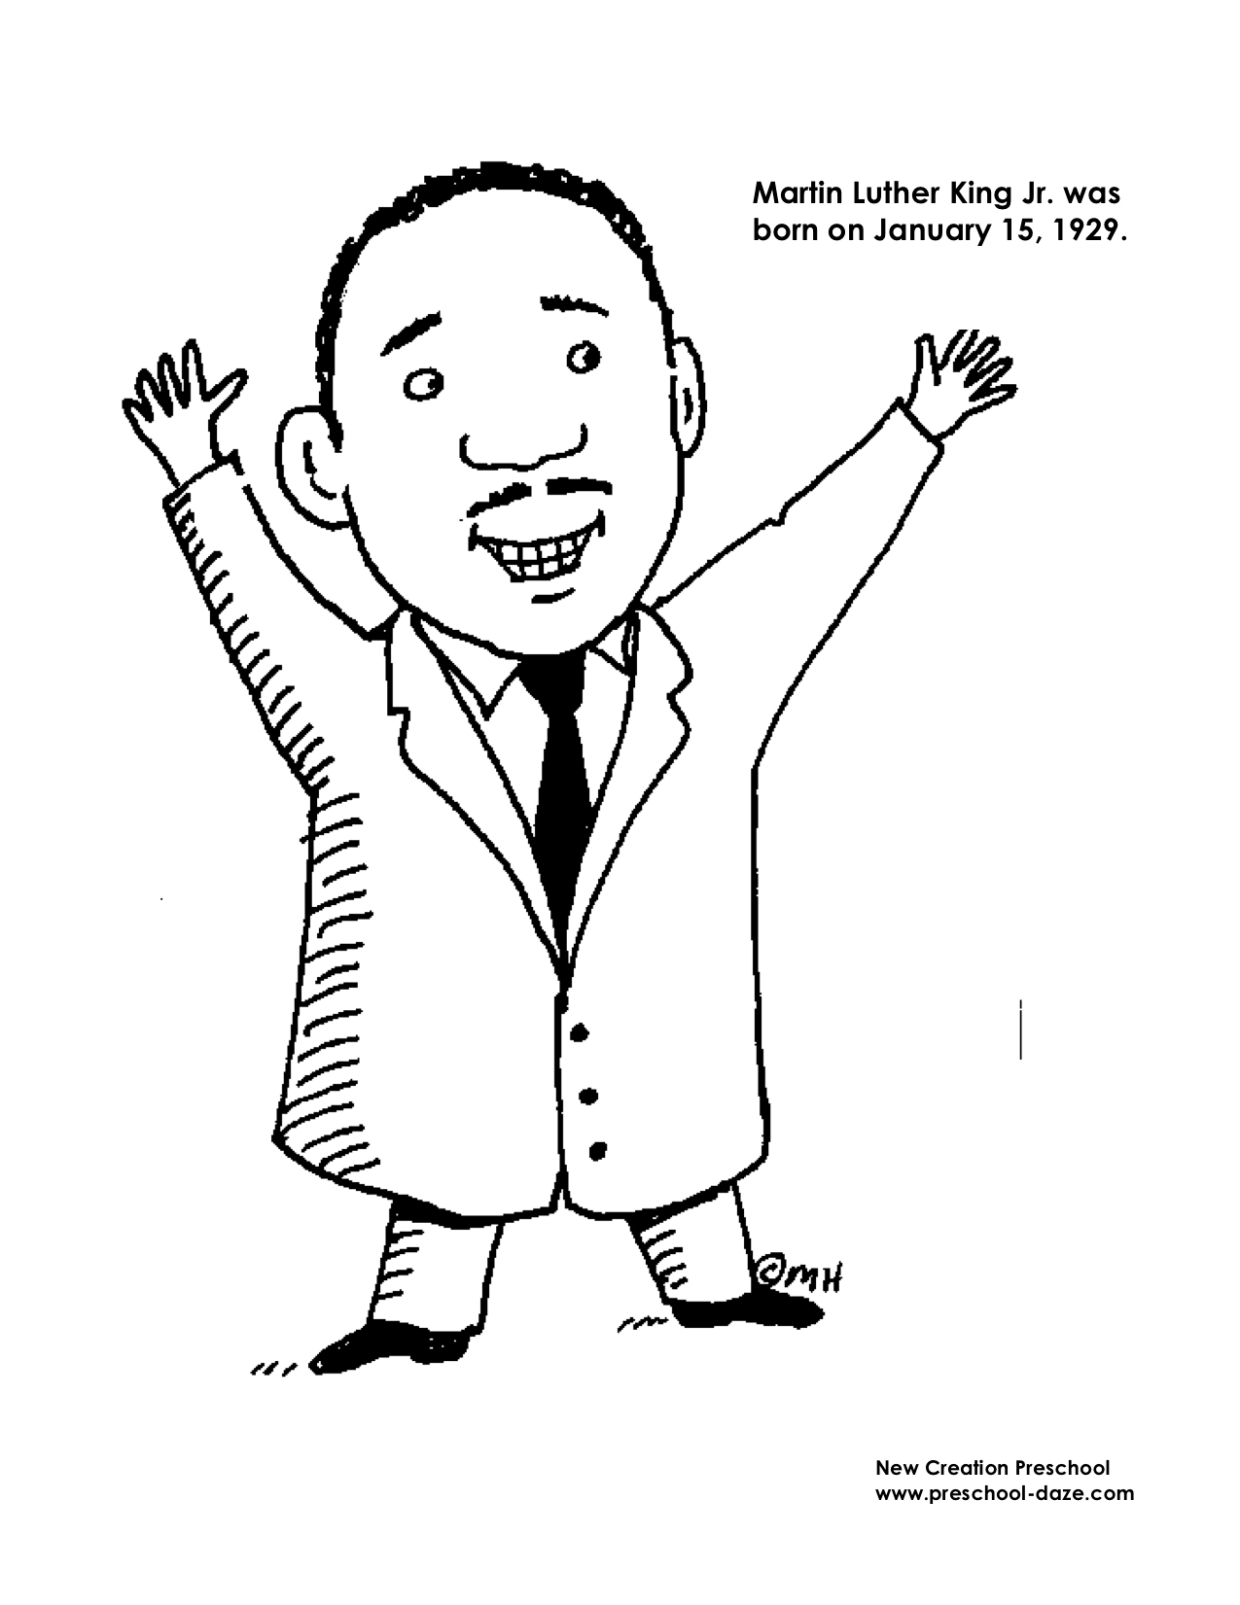 m-is-for-martin-luther-king-jr-printables-new-creation-preschool